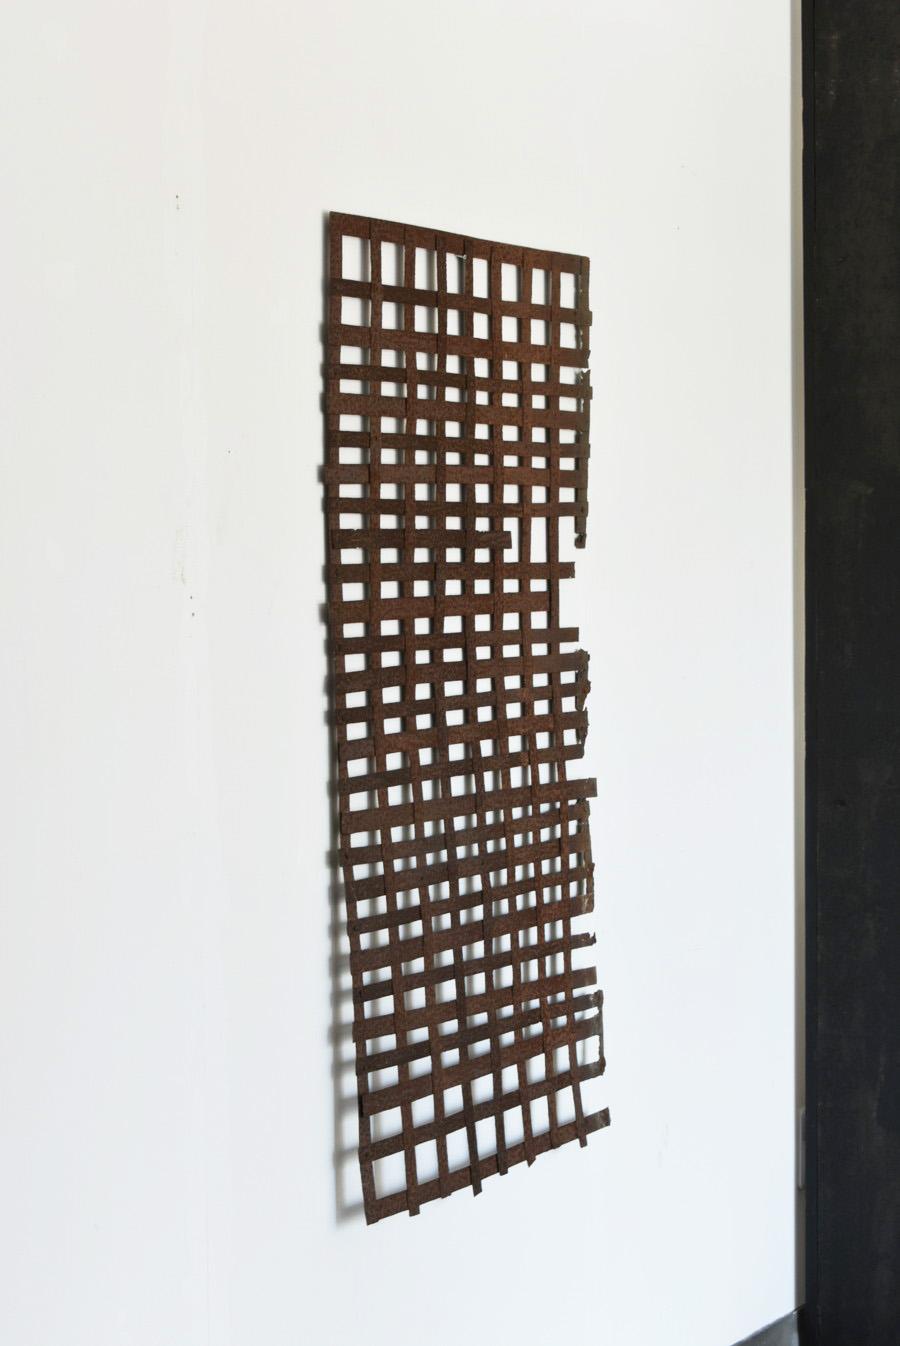 Old Japanese Lattice-Shaped Object Made of Iron Plate / 1868-1940 / Abstract Art 8